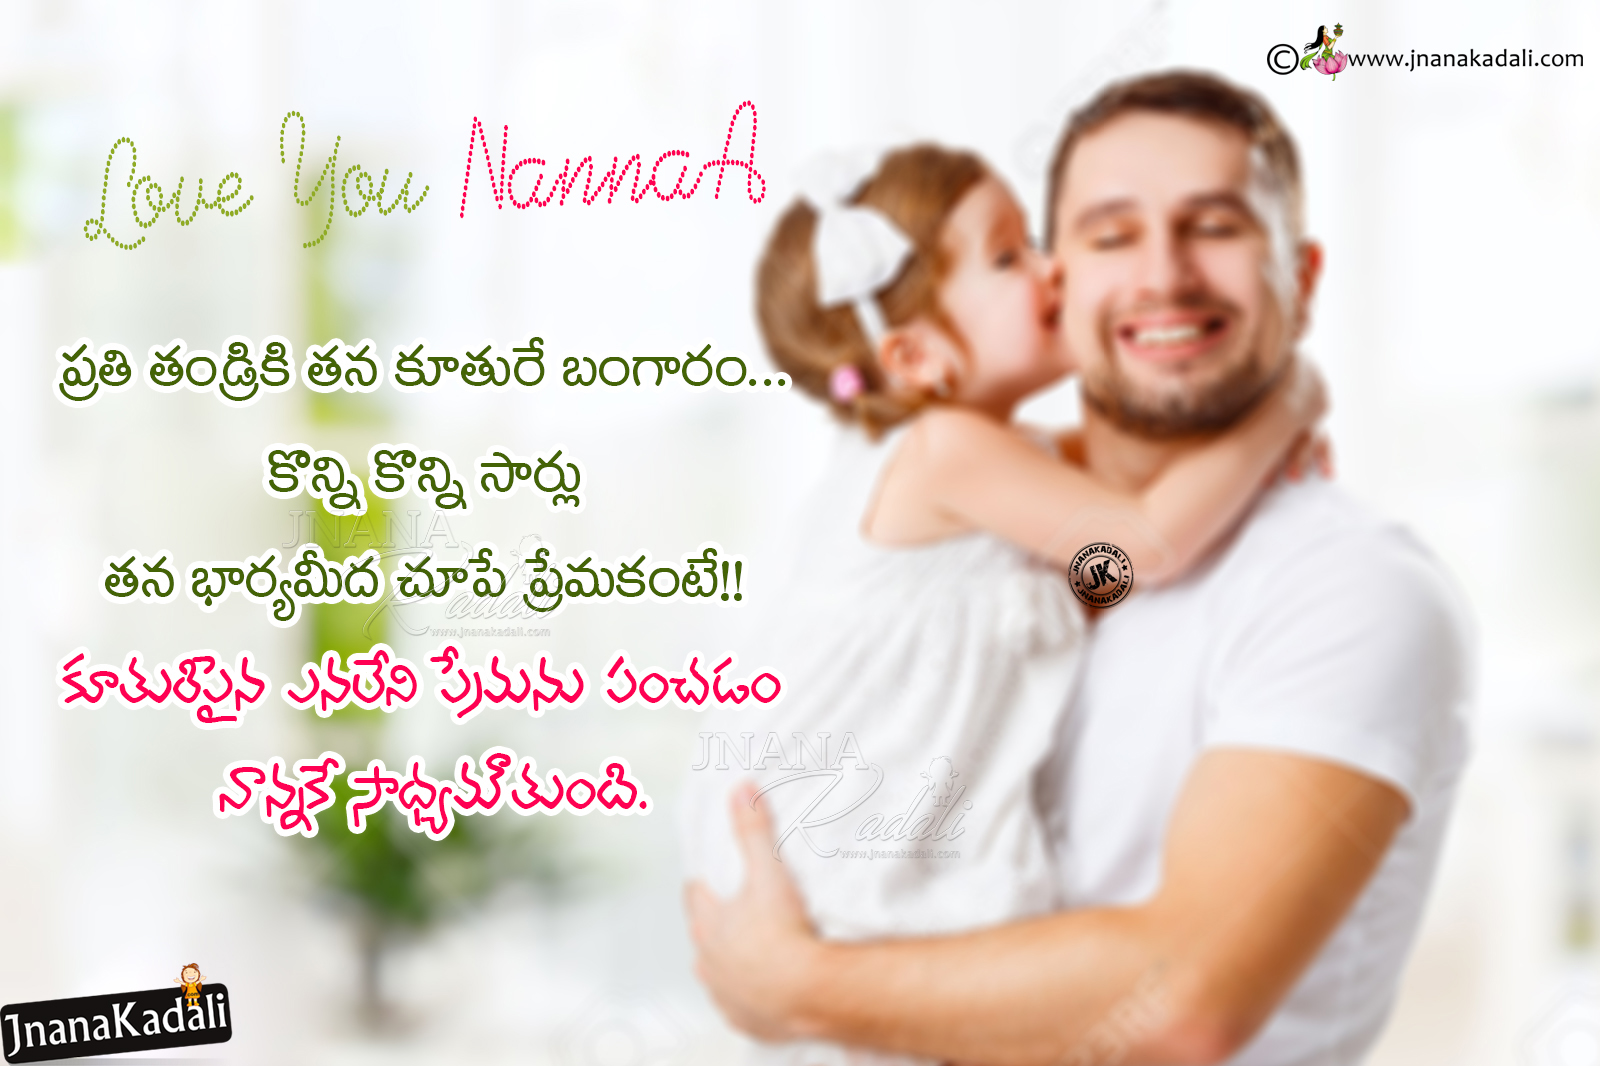 Telugu Father Quotes best father quotes in telugu Father and Daughter hd wallpapers free Father most loving Quotes in Telugu Telugu Naanna